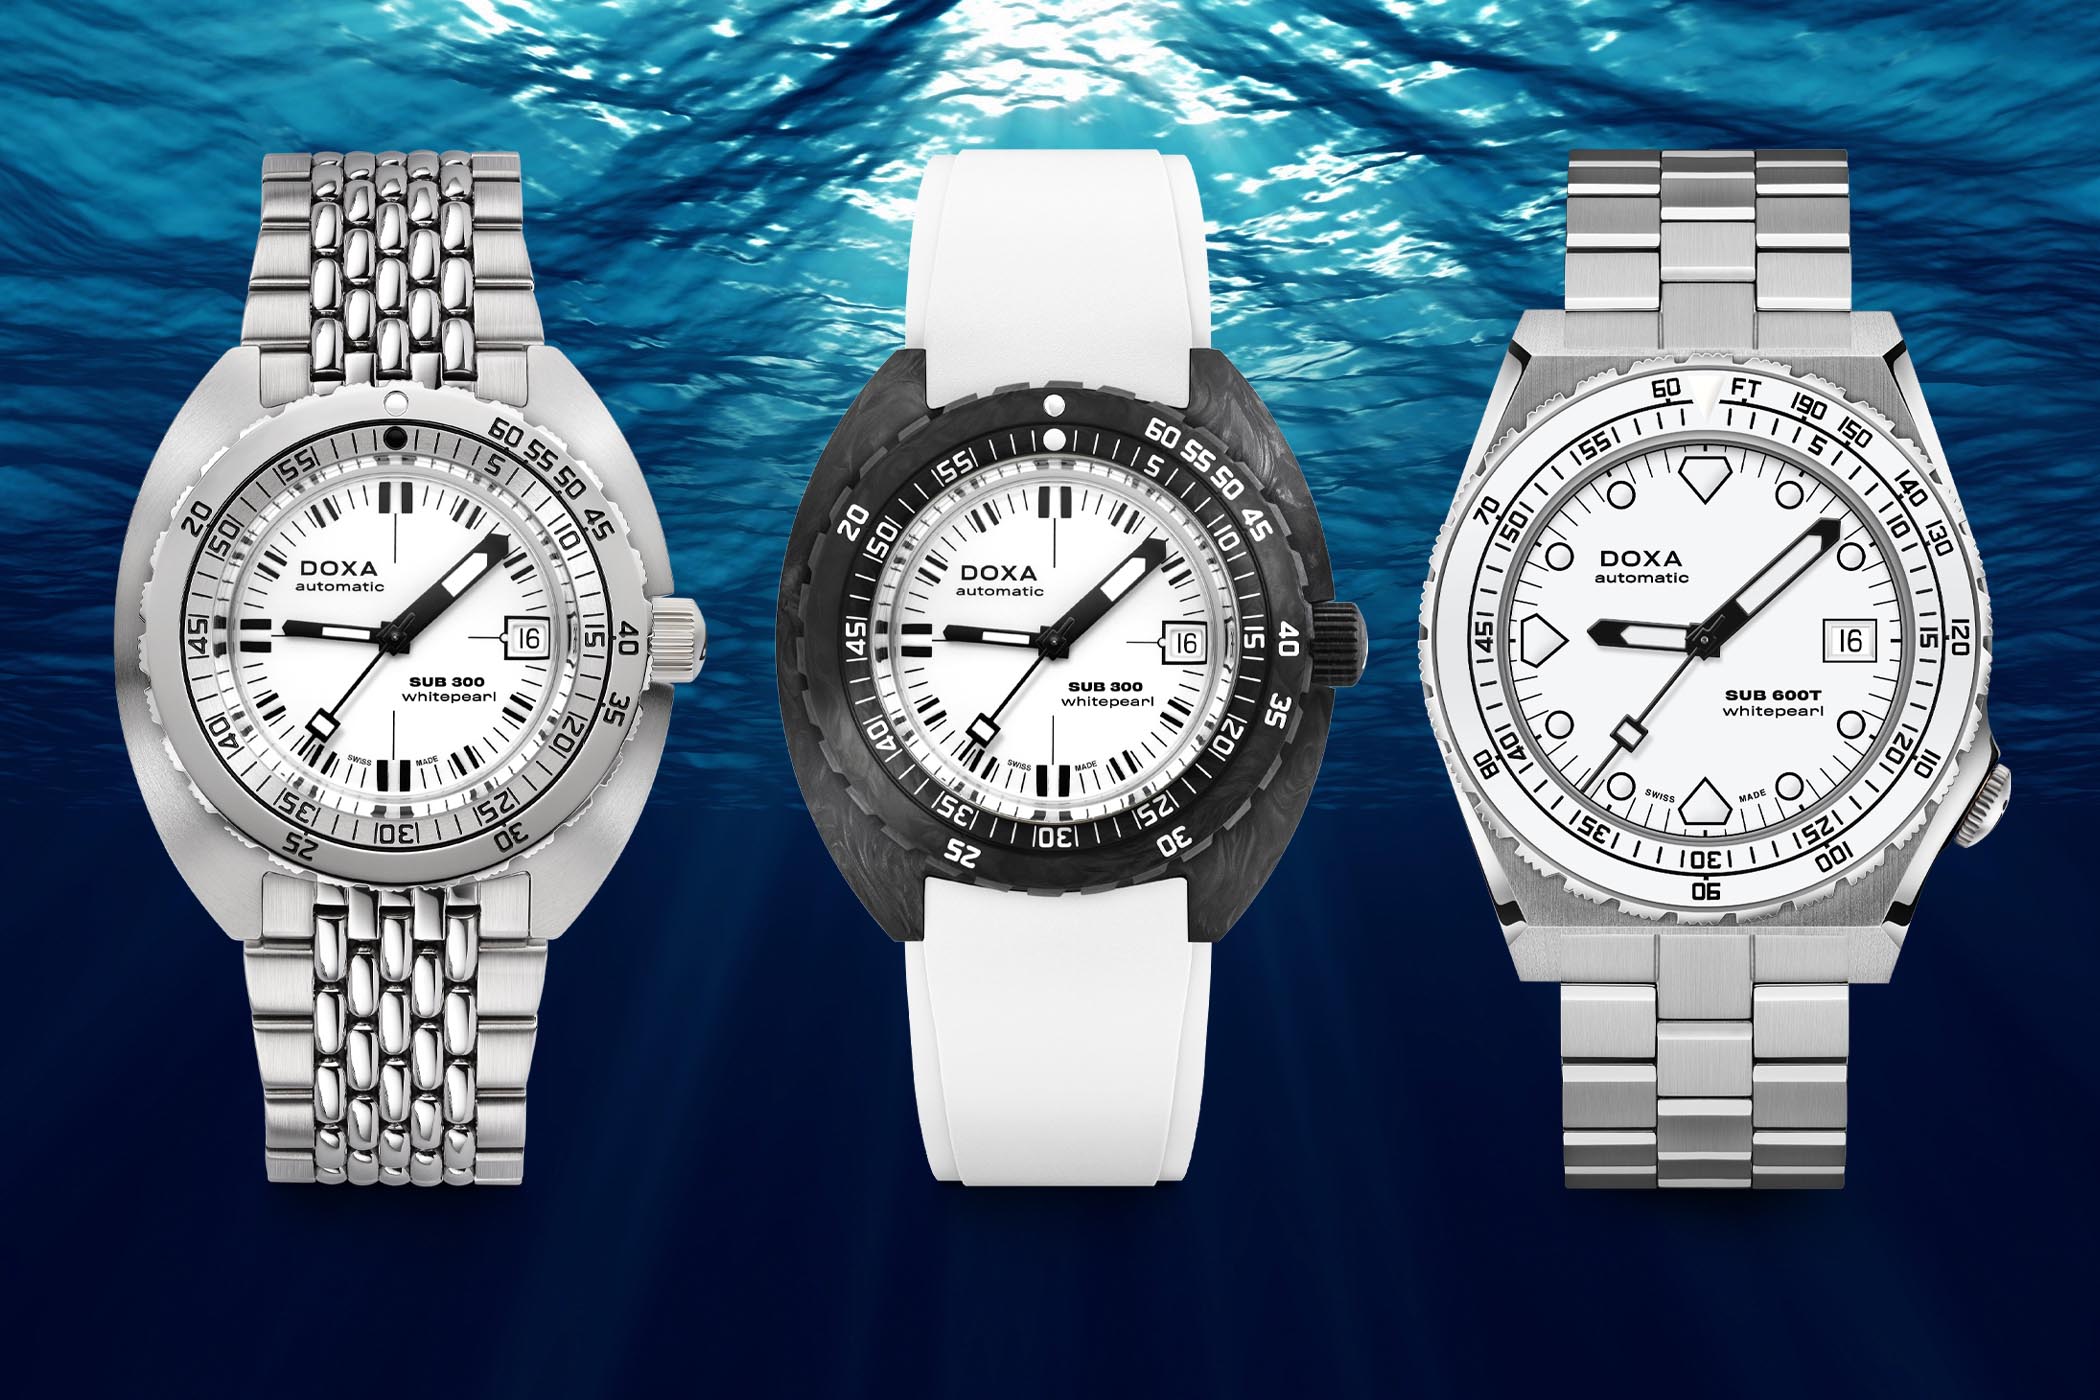 Introducing - The Whitepearl Theme Spreads Across all Doxa SUB Collection